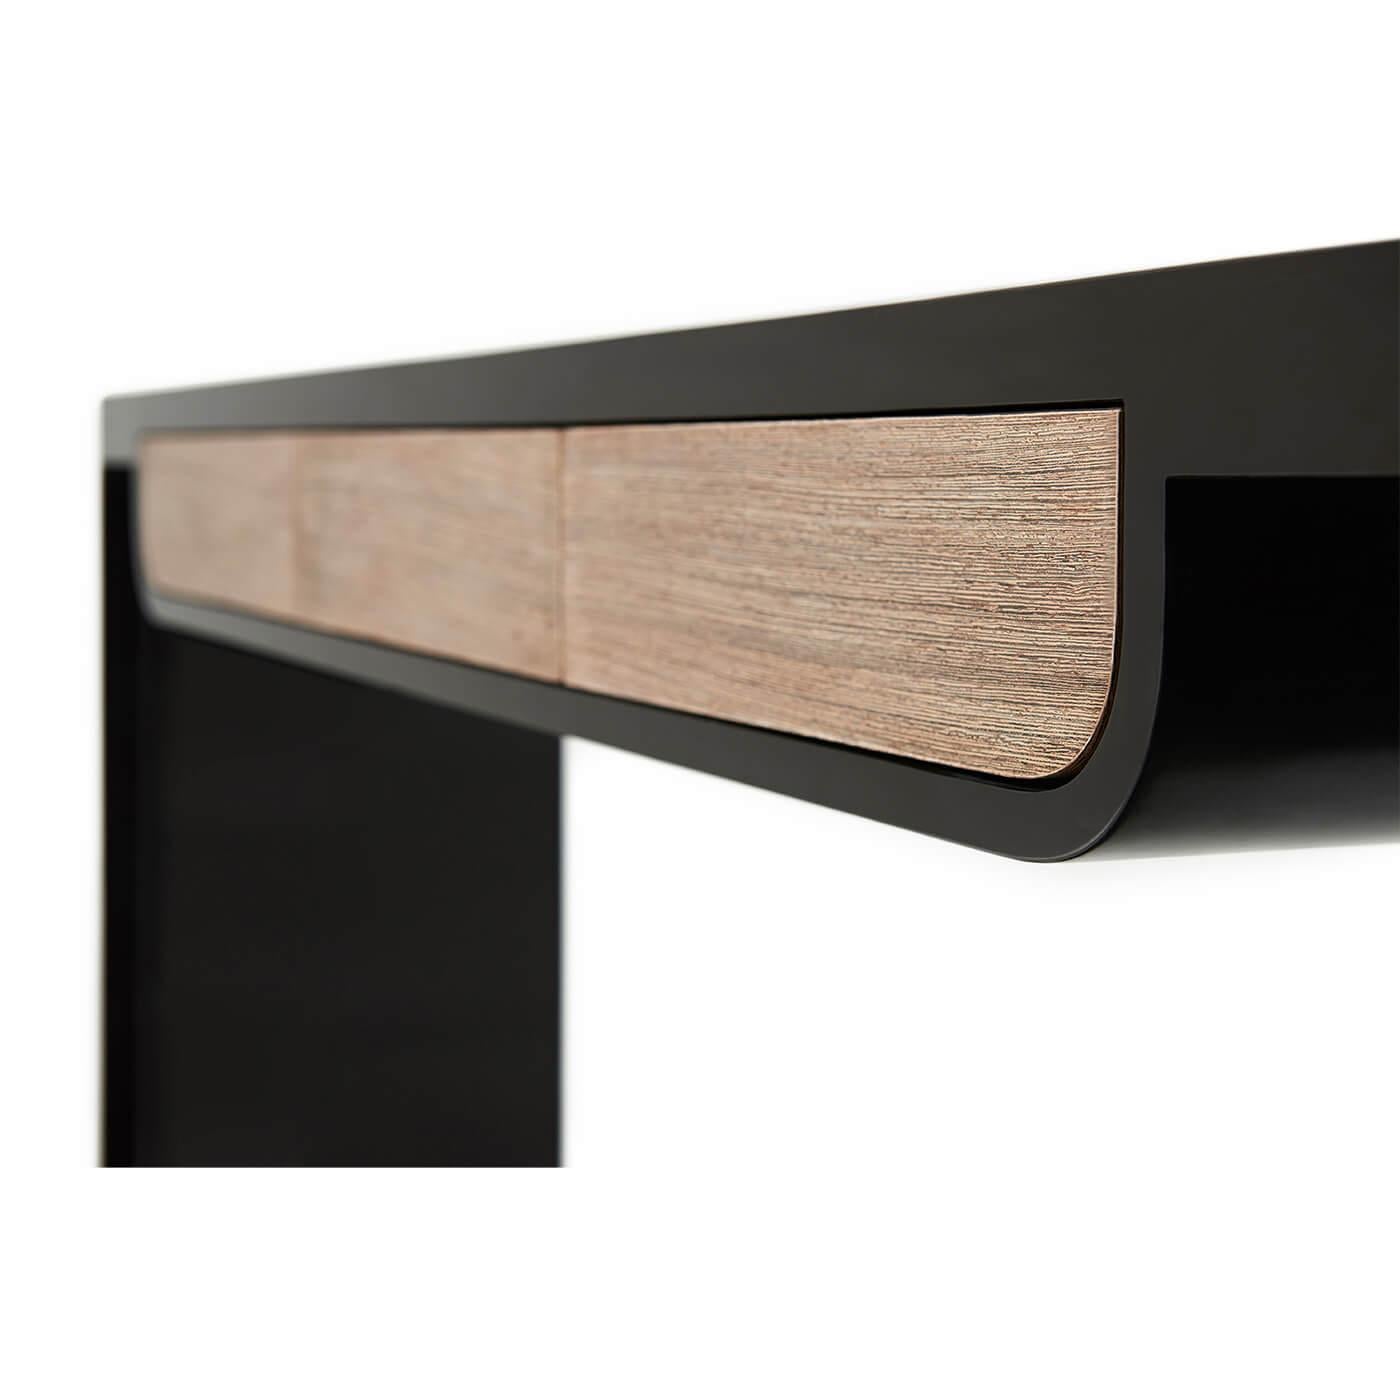 Modern lacquered three-drawer console with three brushed wenge veneered self-closing drawers.
Dimensions: 66